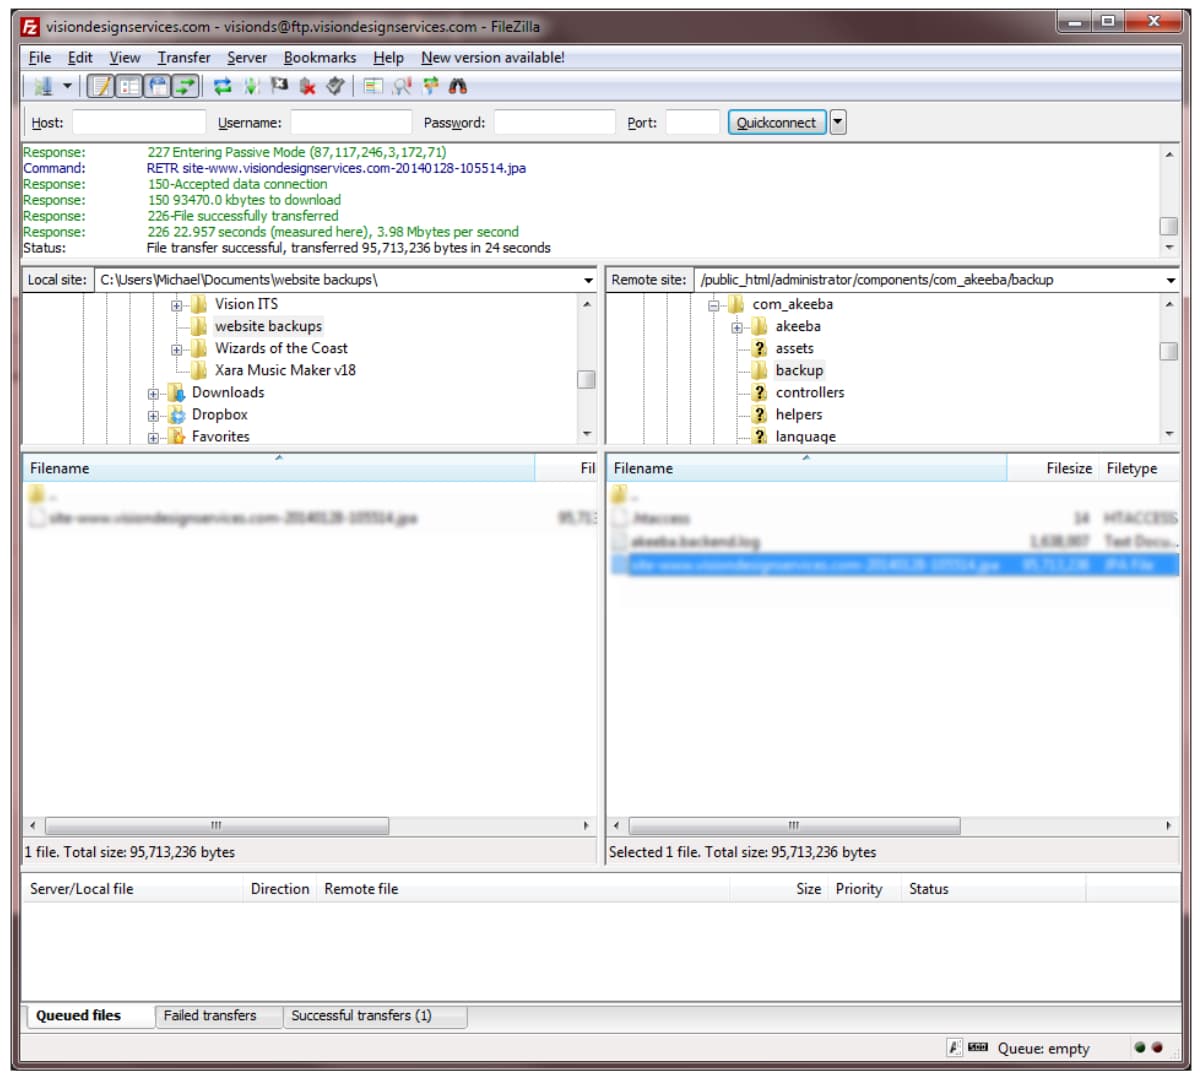 Filezilla-Application-Screen-File-Download-Completed